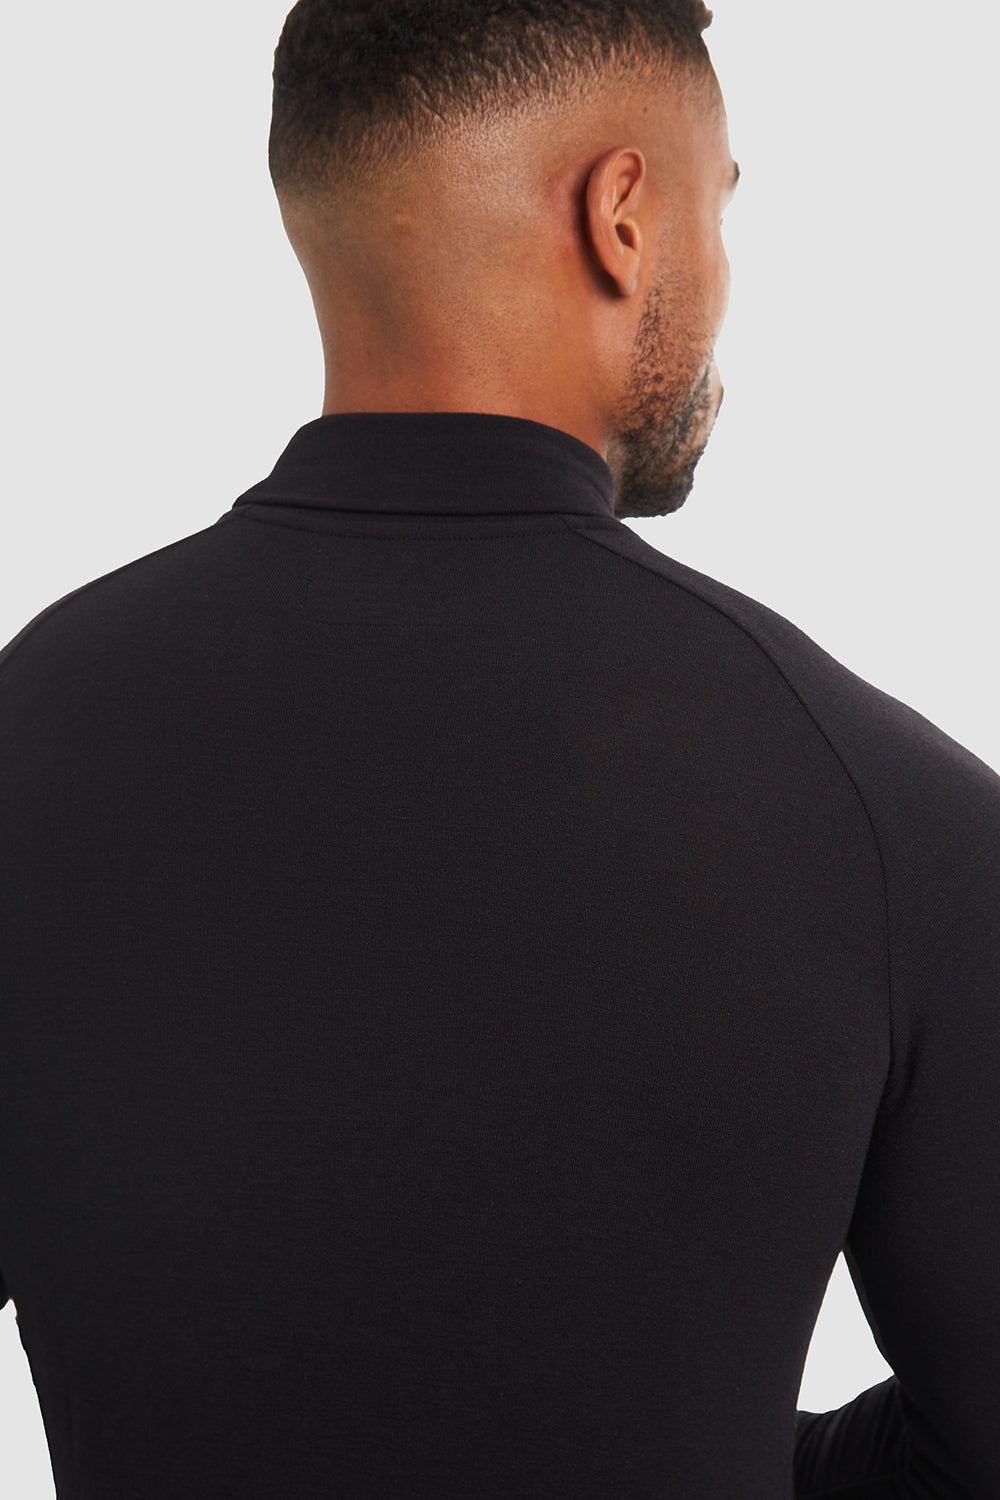 USA - Knit - Neck Black Jersey TAILORED (LS) in Look Roll ATHLETE